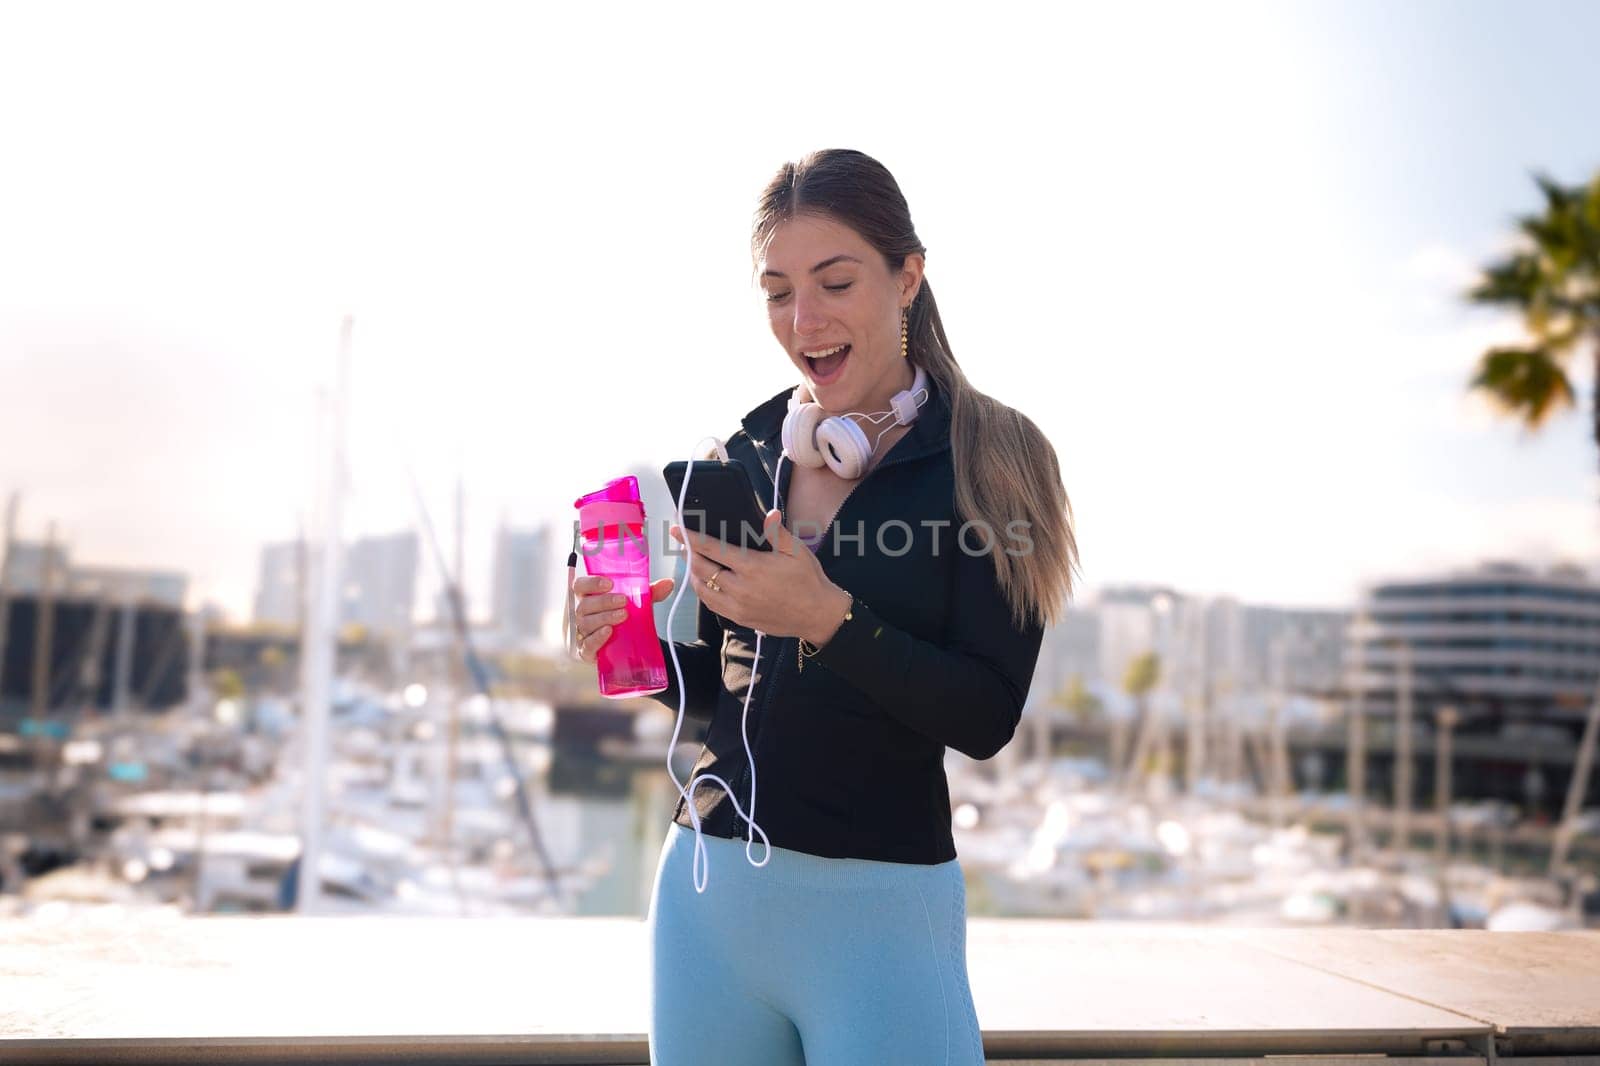 Cheerful girl using an app on a cell phone and holding a sports bottle.